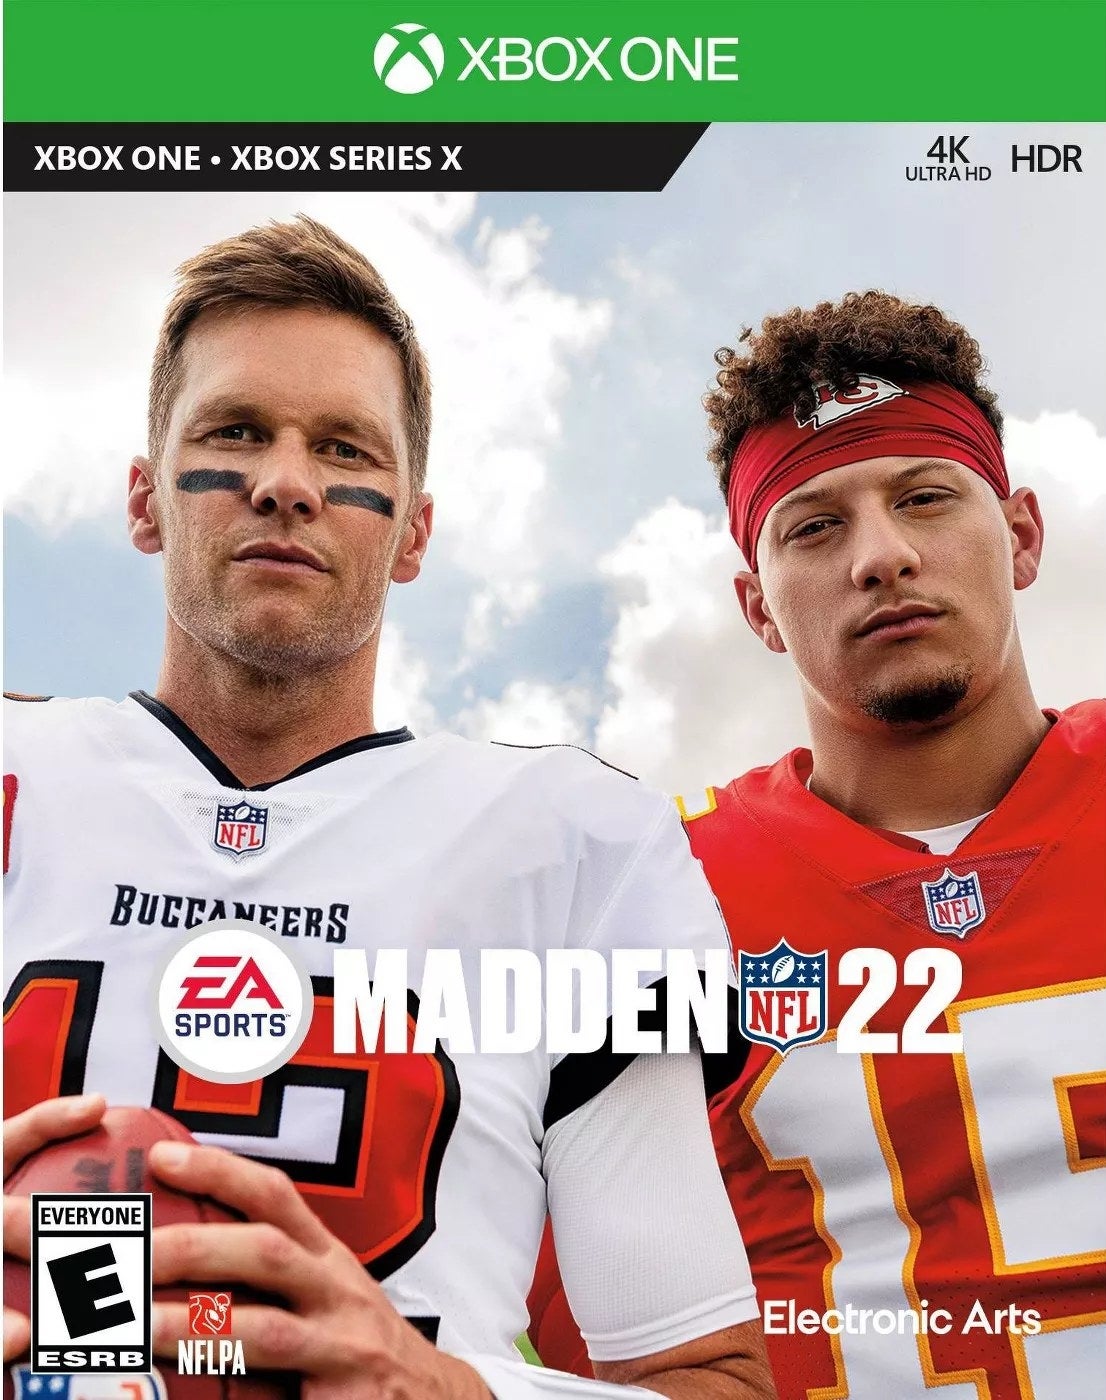 The Madden 22 video game